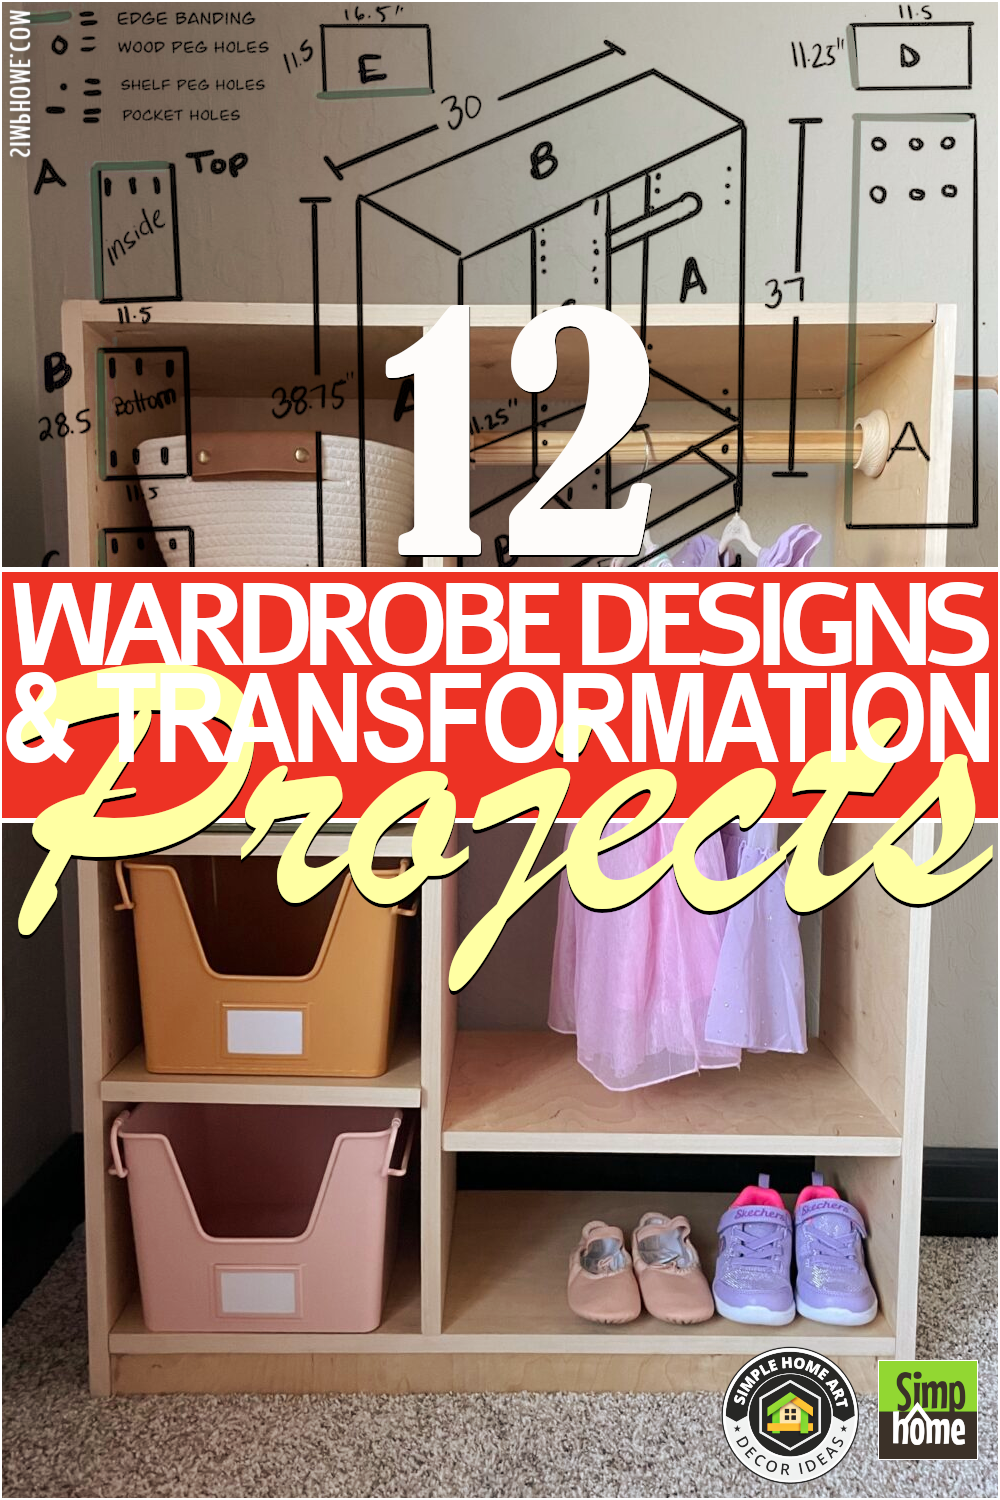 Wardrobe design and transformation project for a small bedroom